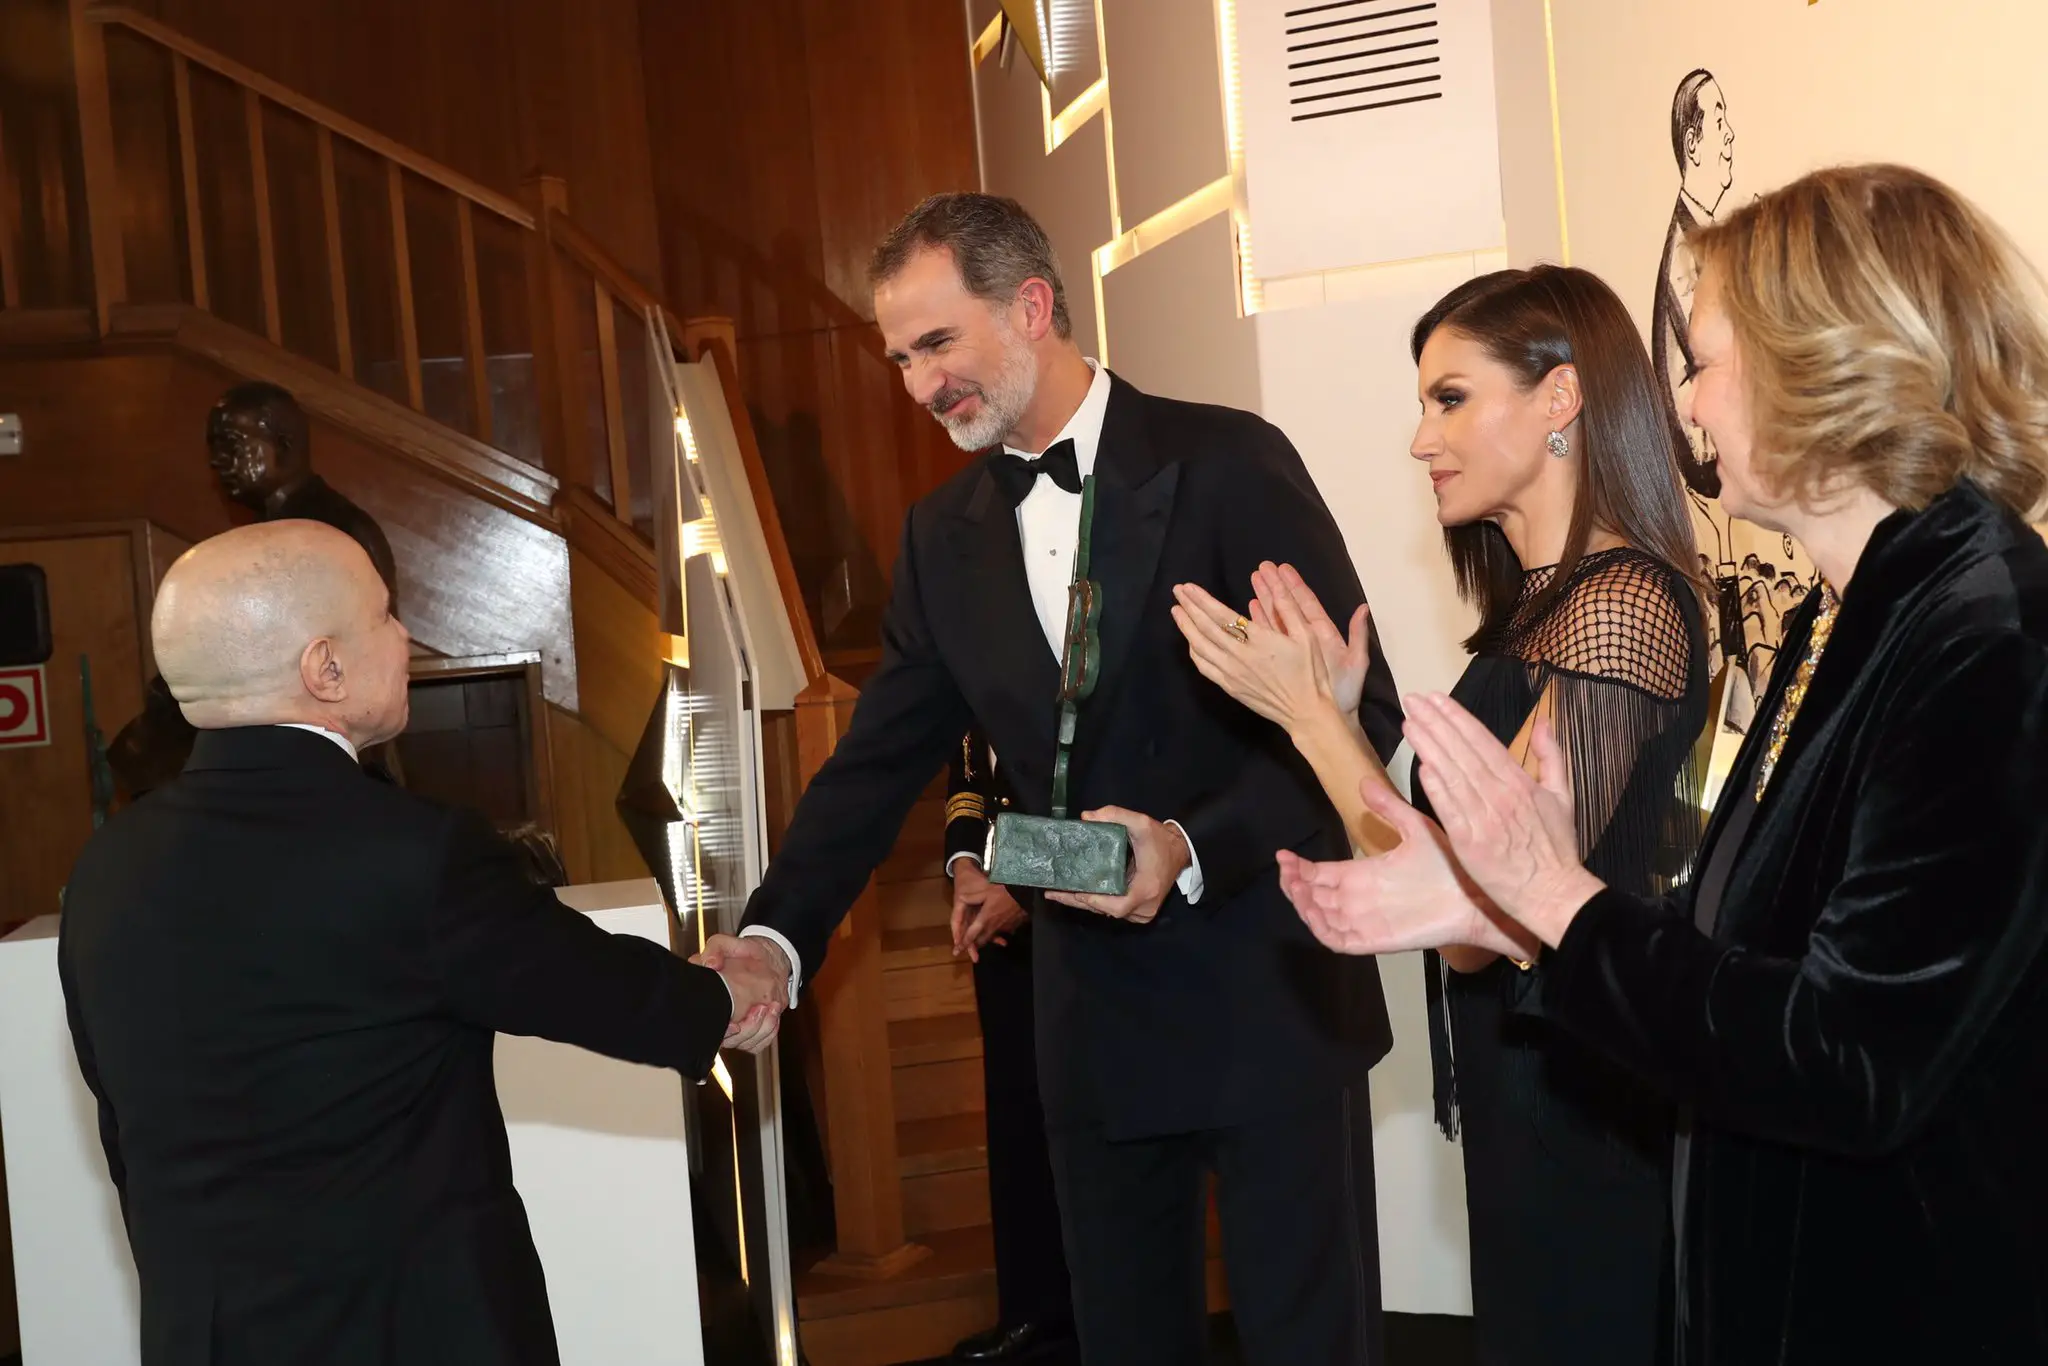 King Felipe and Queen Letizia of Spain presented the ABC Newspaper awards